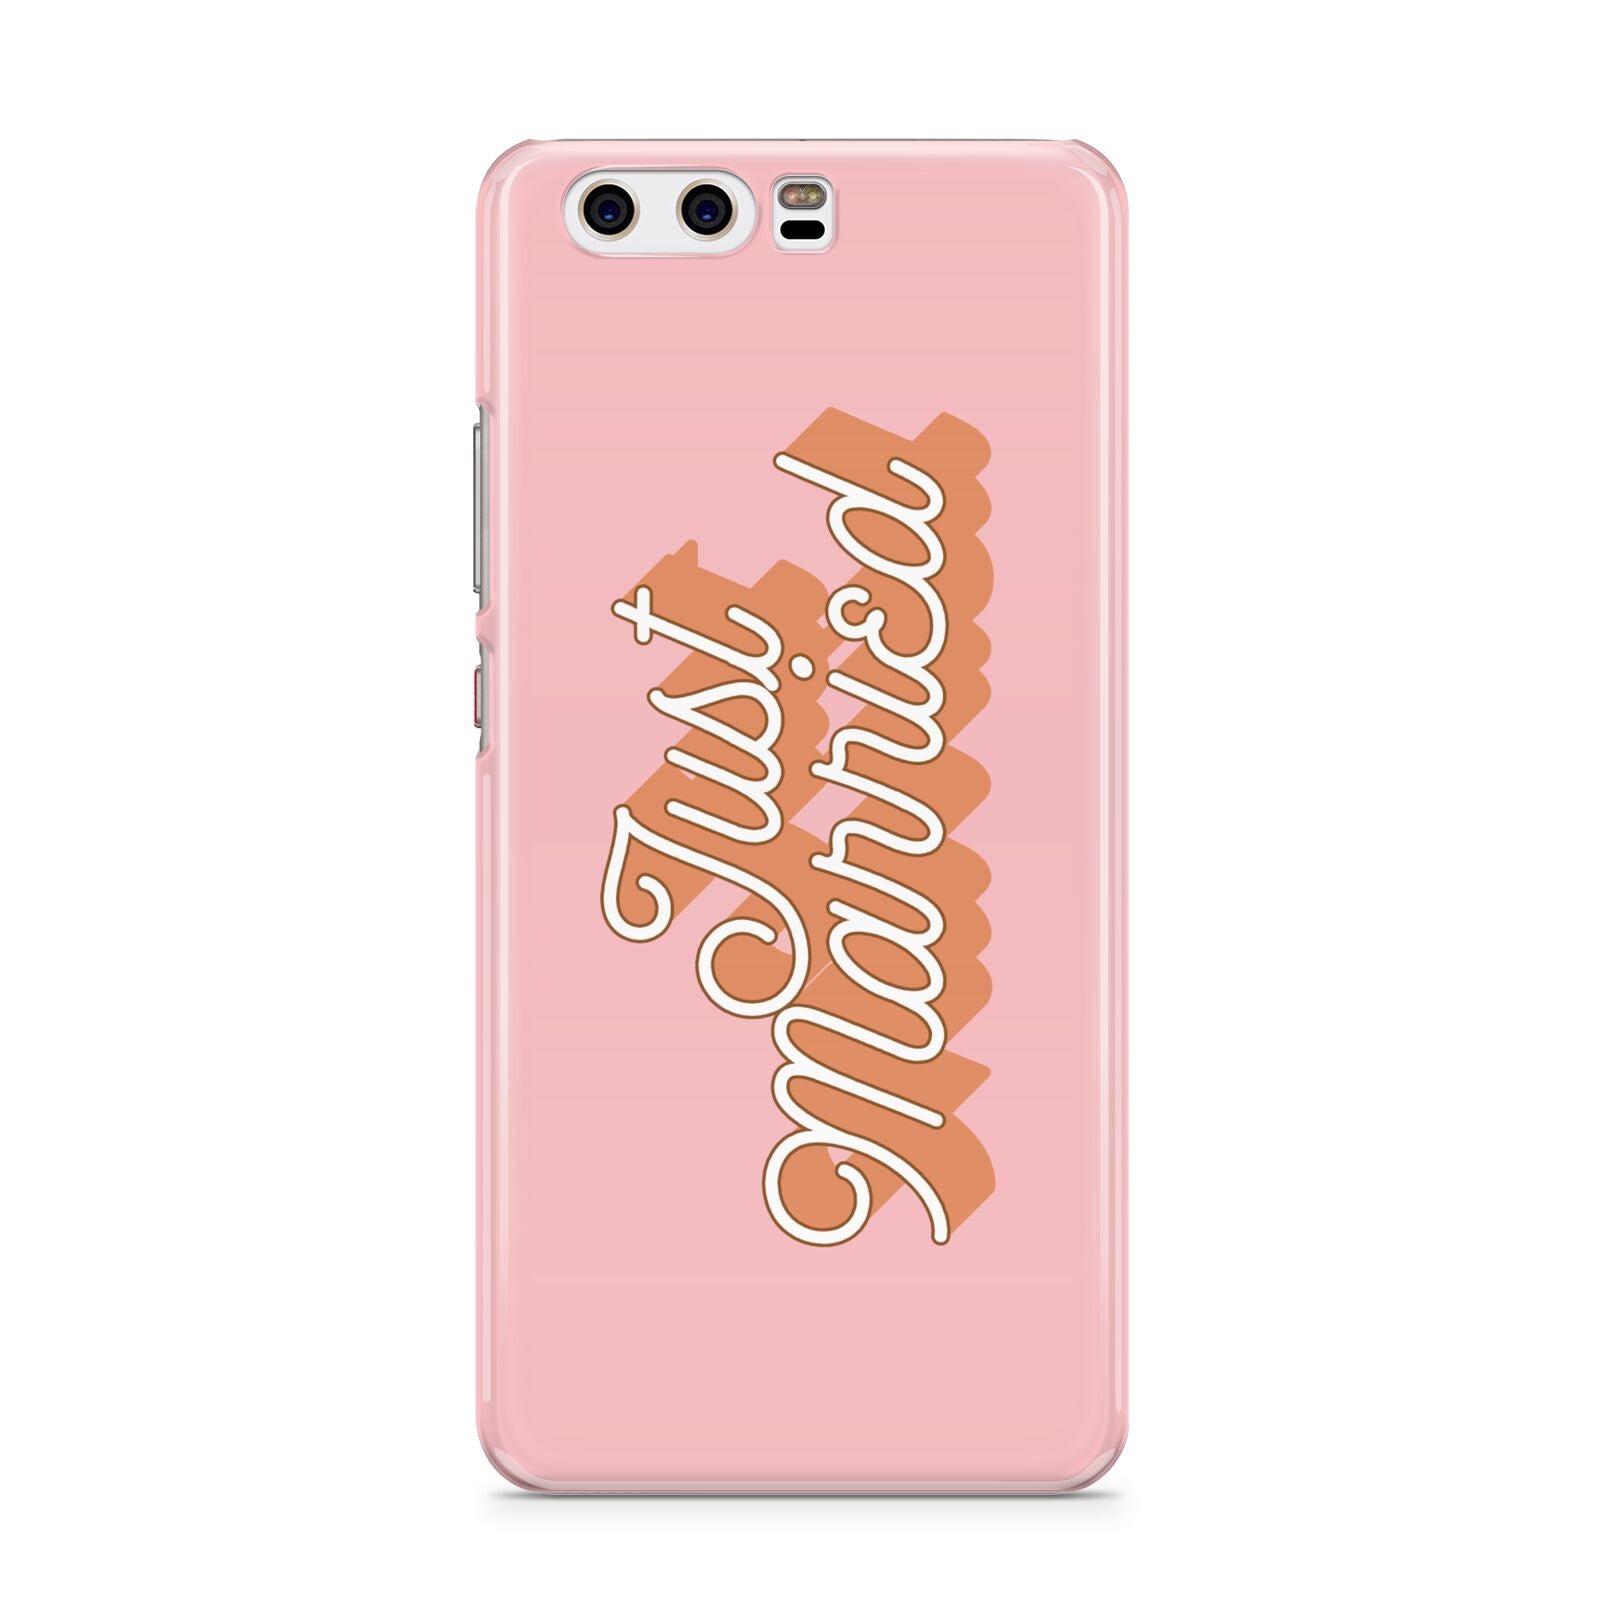 Just Married Pink Huawei P10 Phone Case